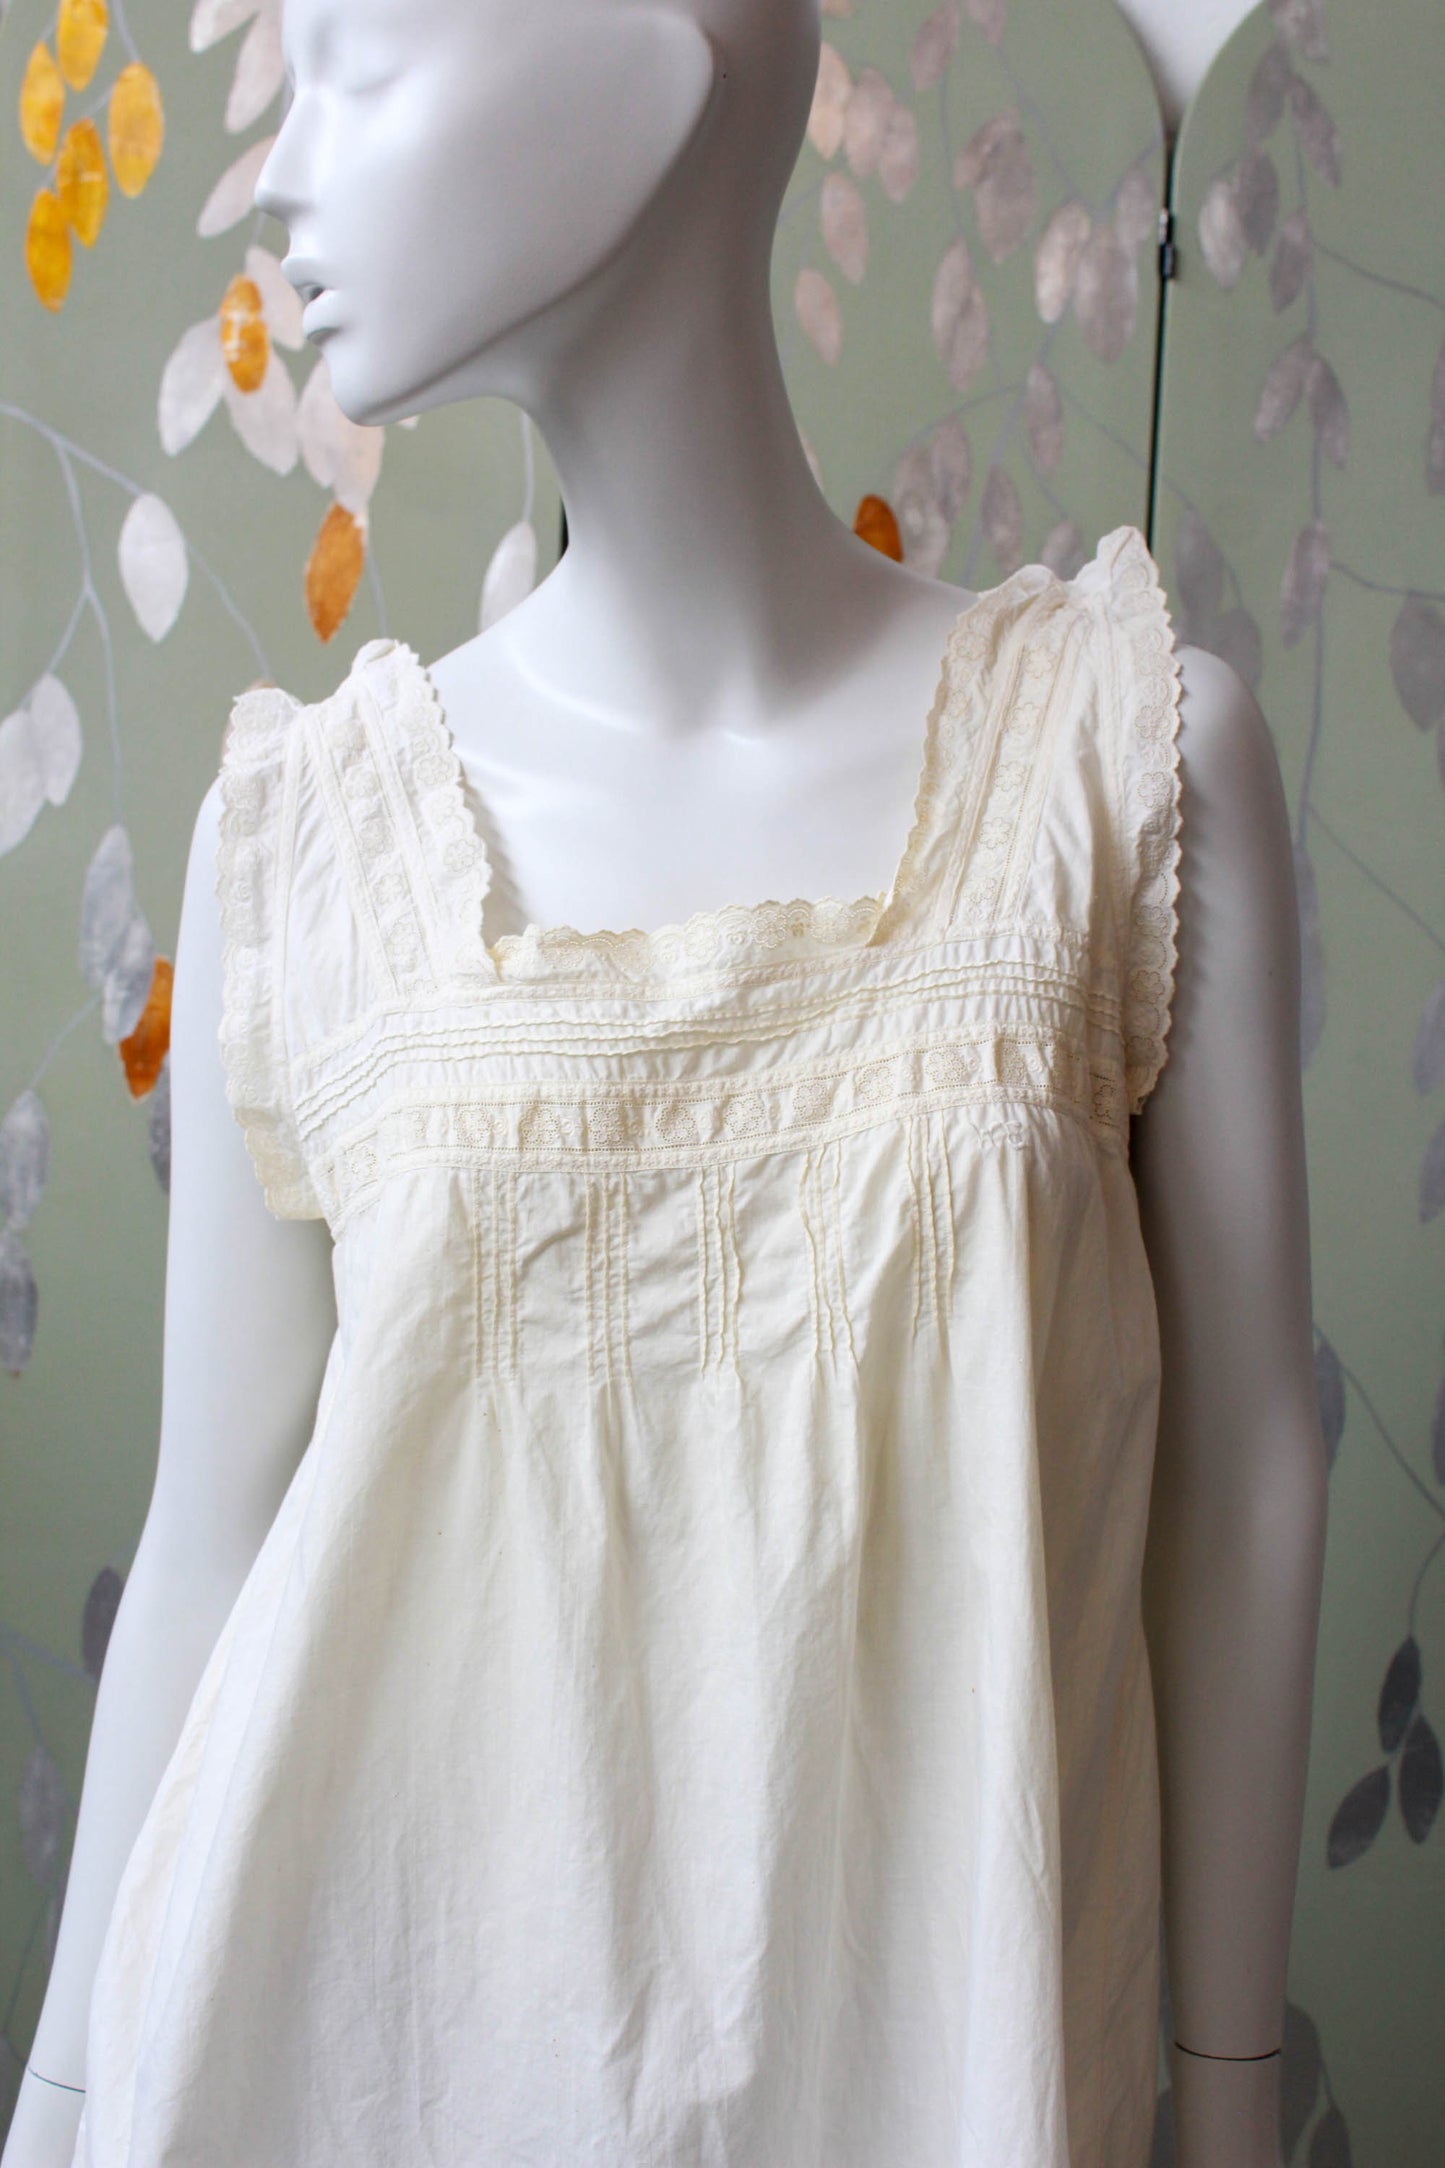 Antique White Cotton Nightgown with Daisy Eyelet Trim, Large